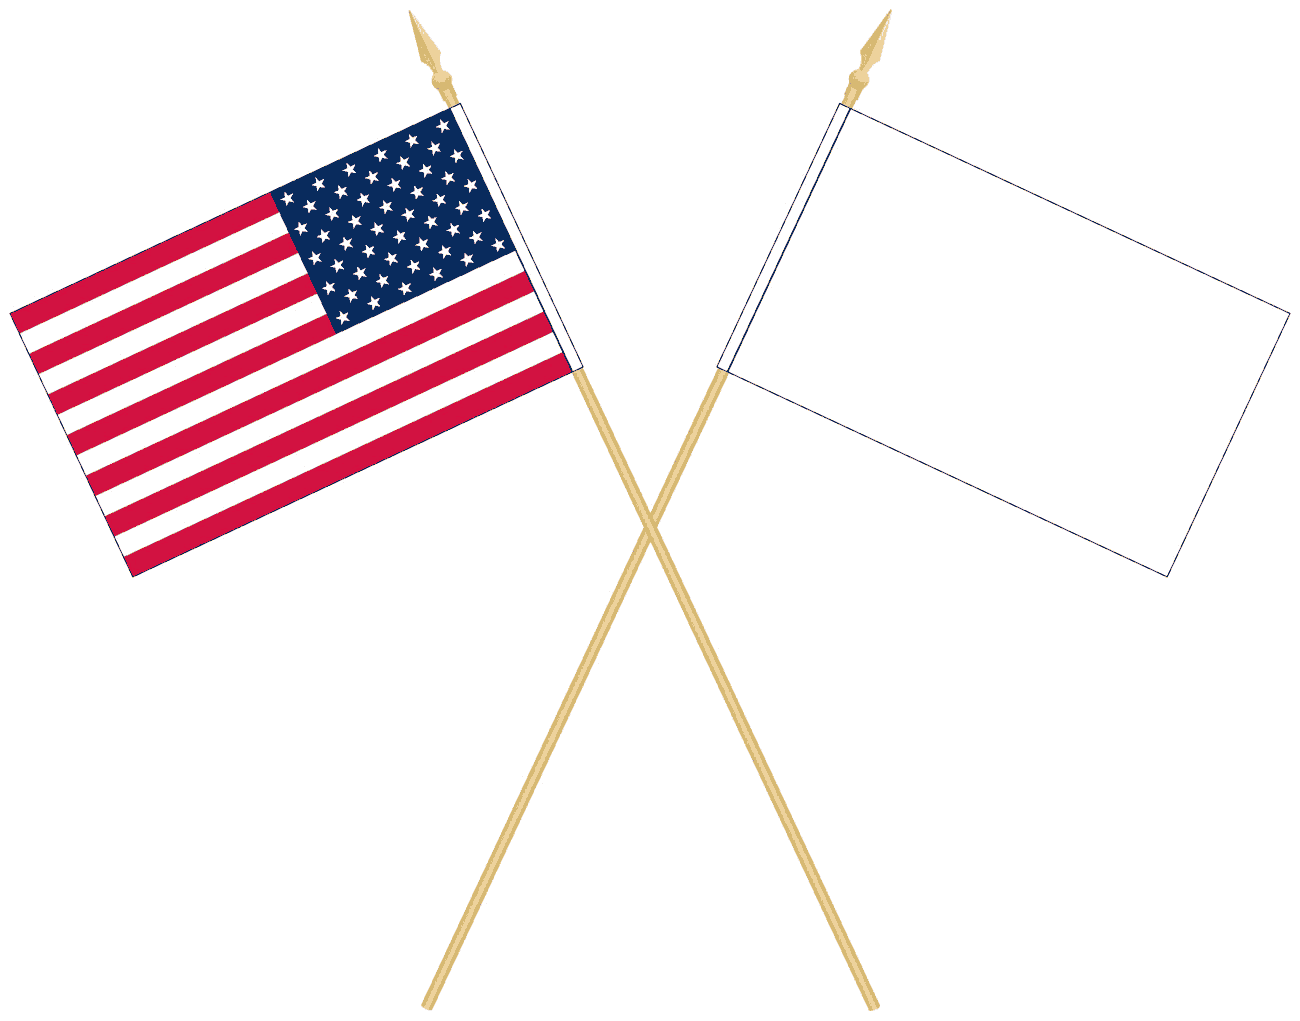 Displaying American Flag with Crossed Staffs